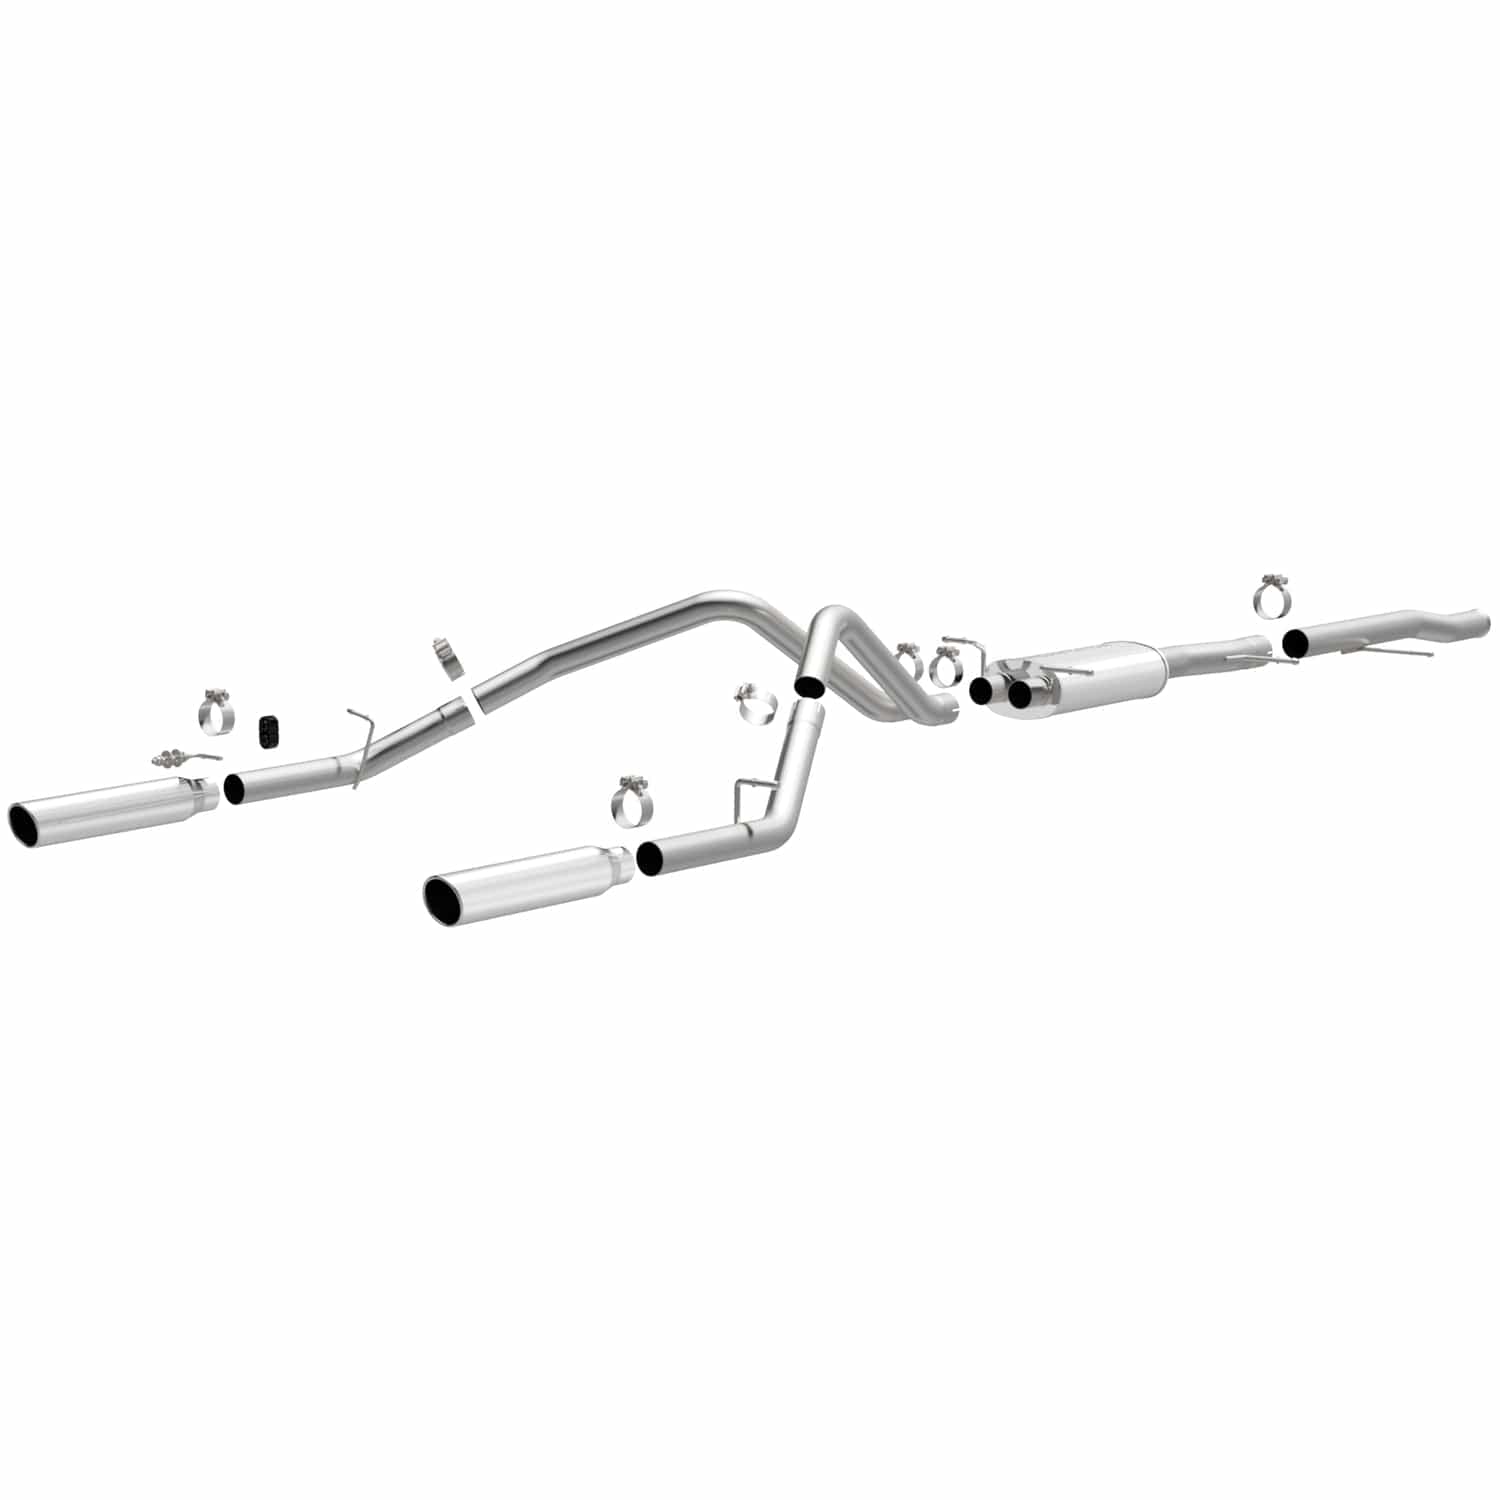 MagnaFlow Street Series Cat-Back Performance Exhaust System 15565